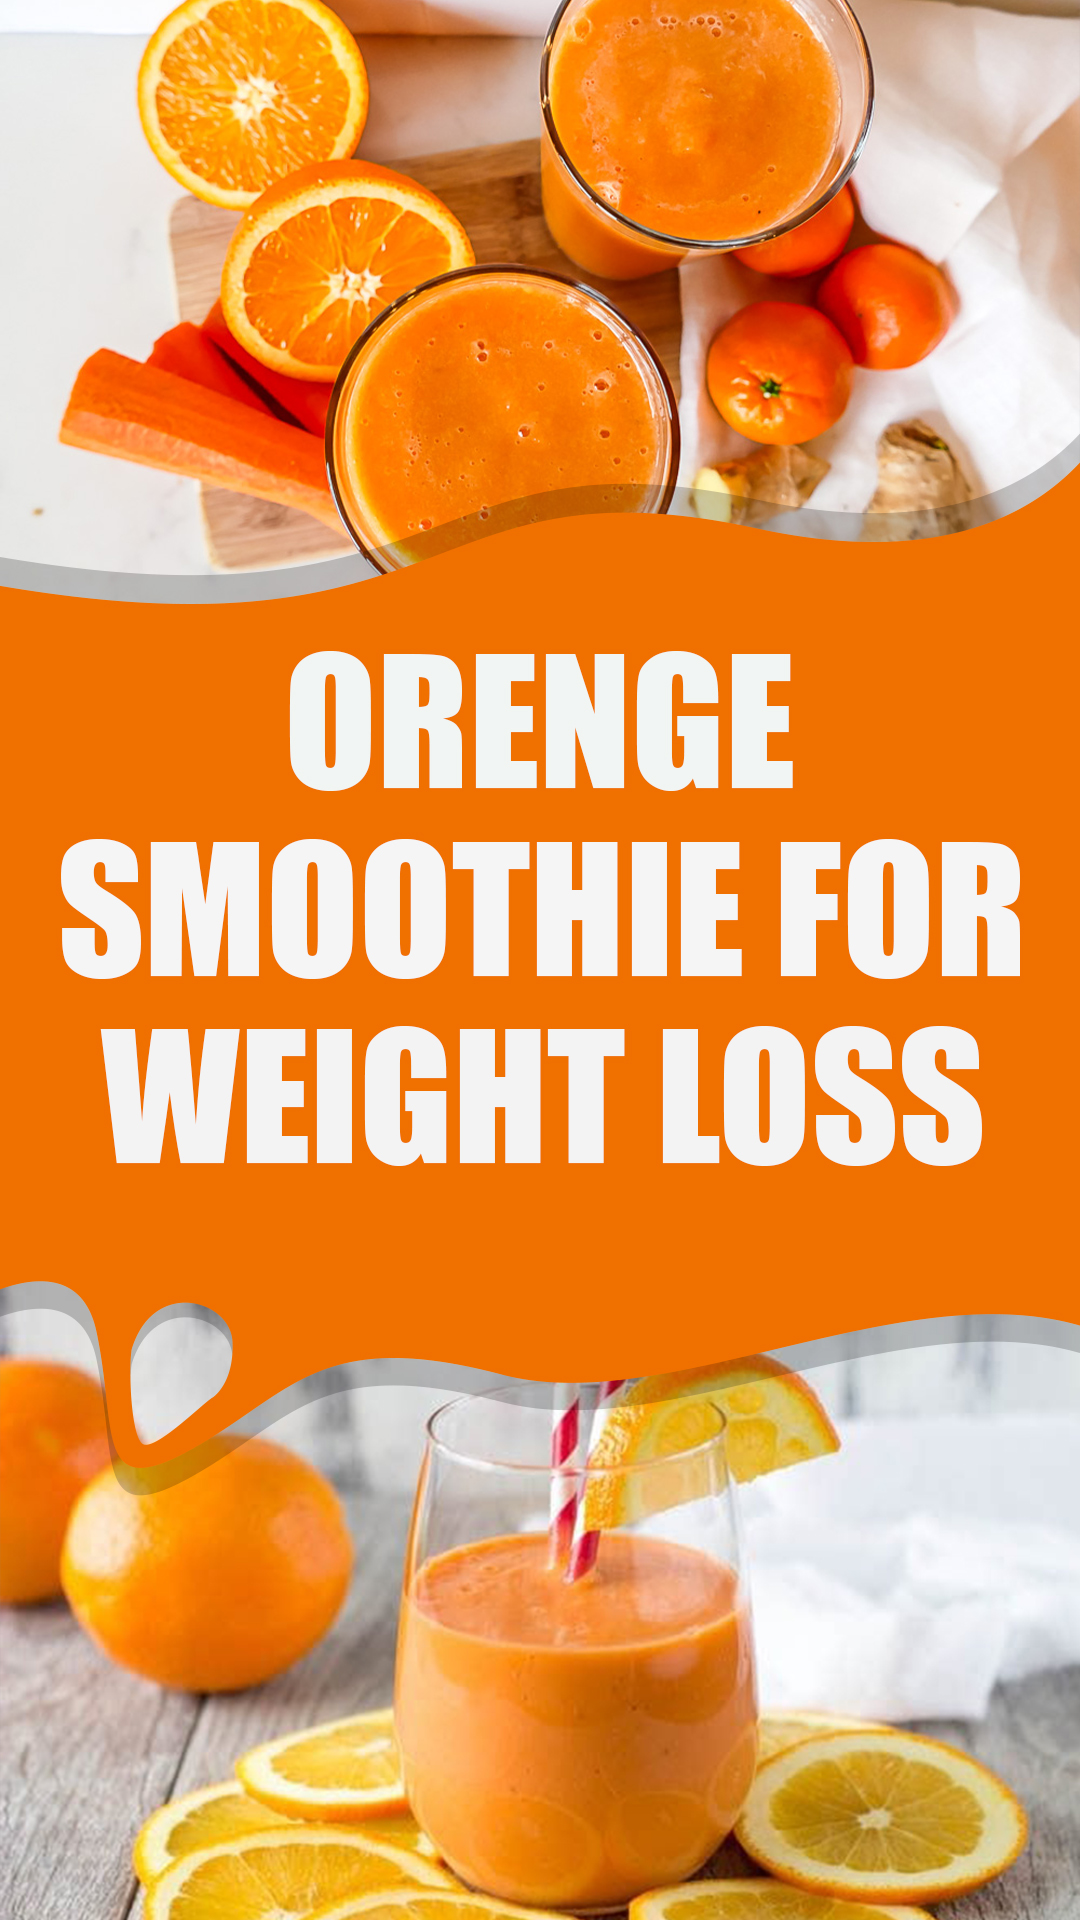 Orange Smoothie Recipe For Weight Loss